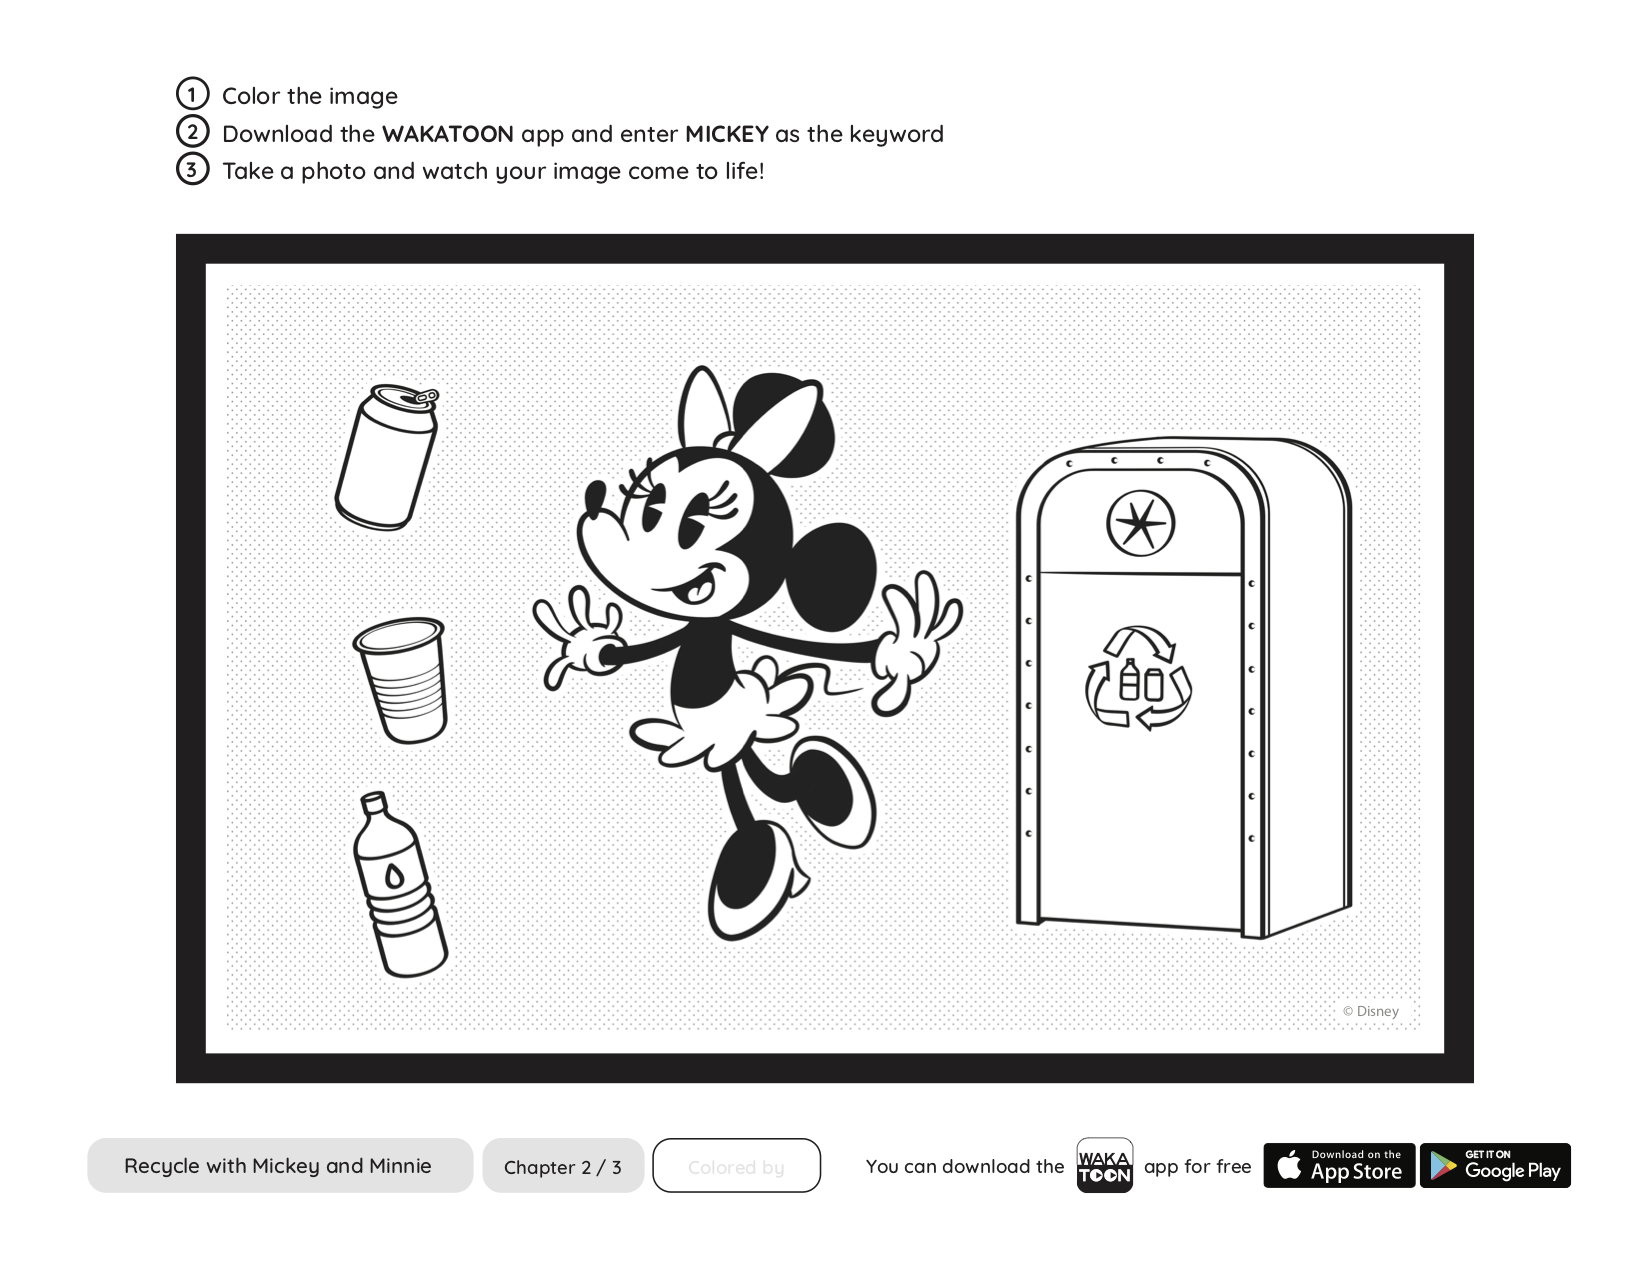 Recycle With Mickey and Minnie